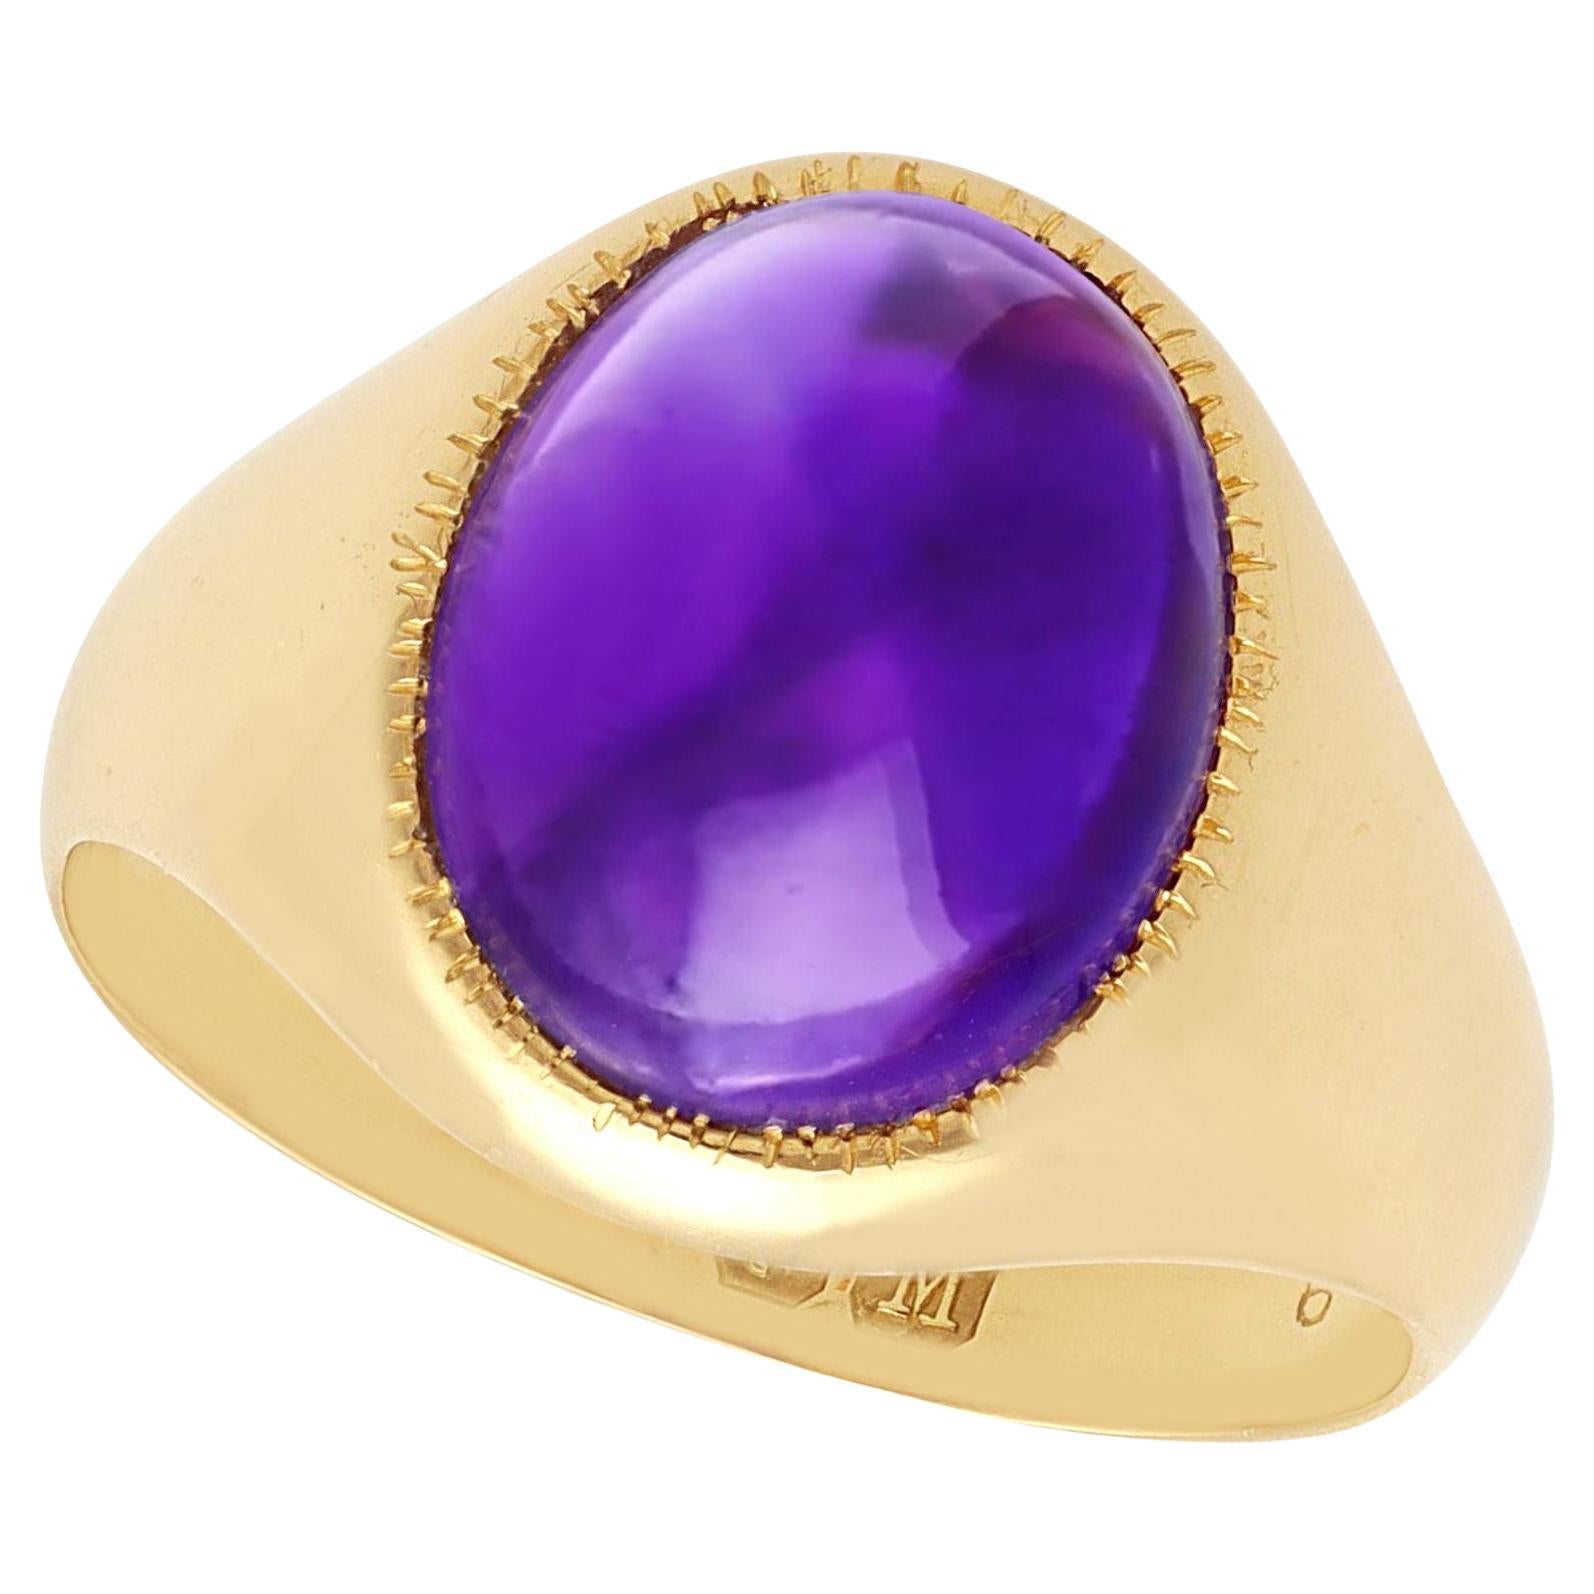 Antique 1936 4.33 Carat Amethyst and Yellow Gold Signet Ring For Sale